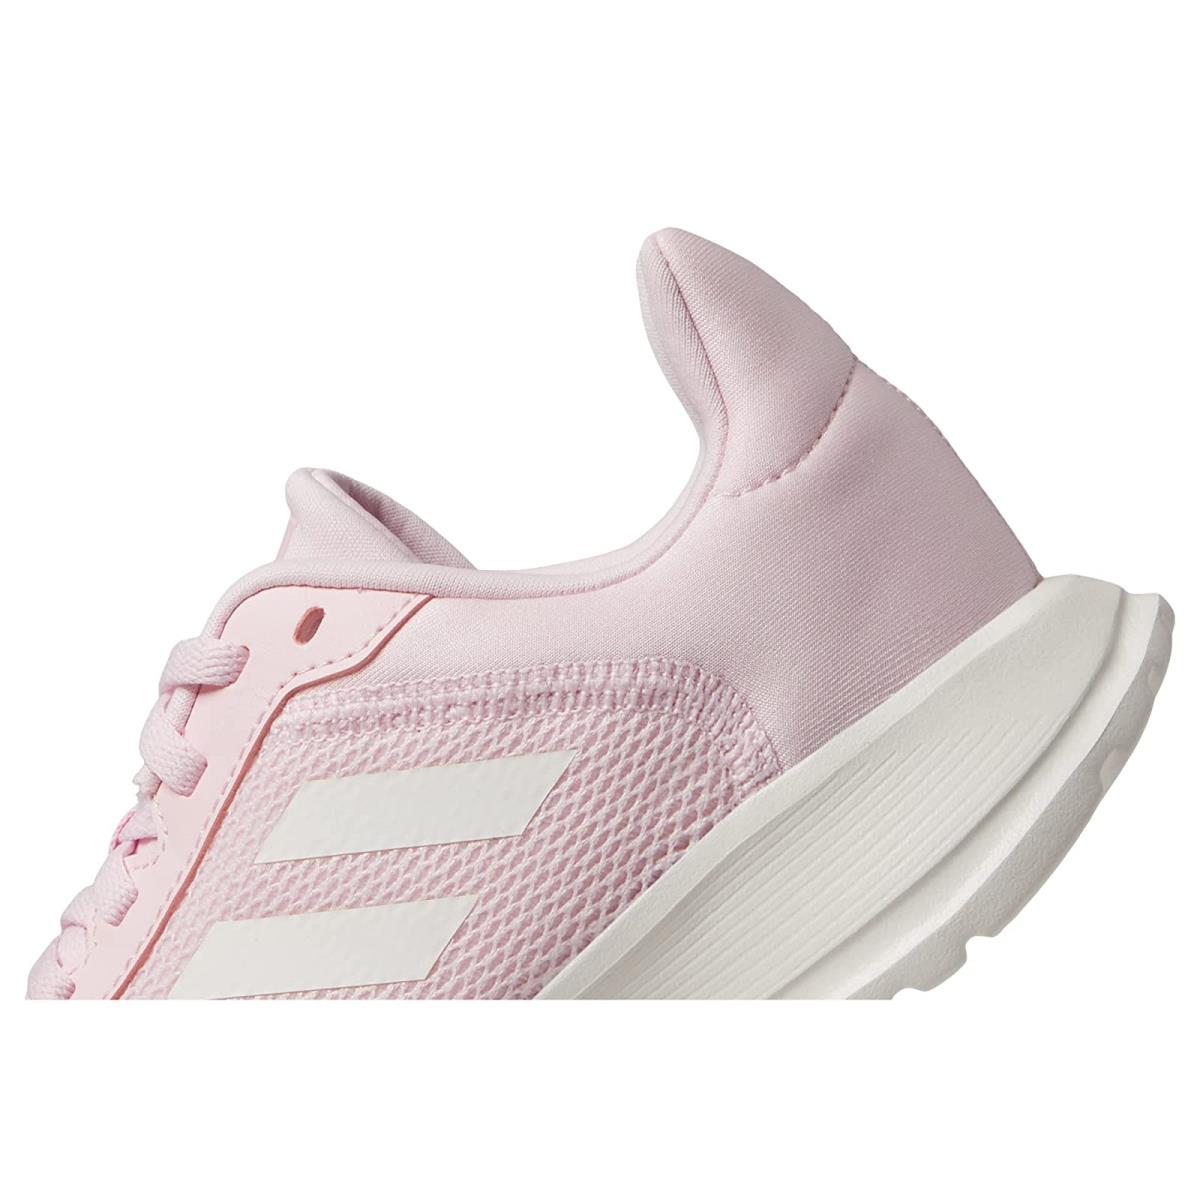 Adidas shoes  - Clear Pink/White/Clear Pink 3